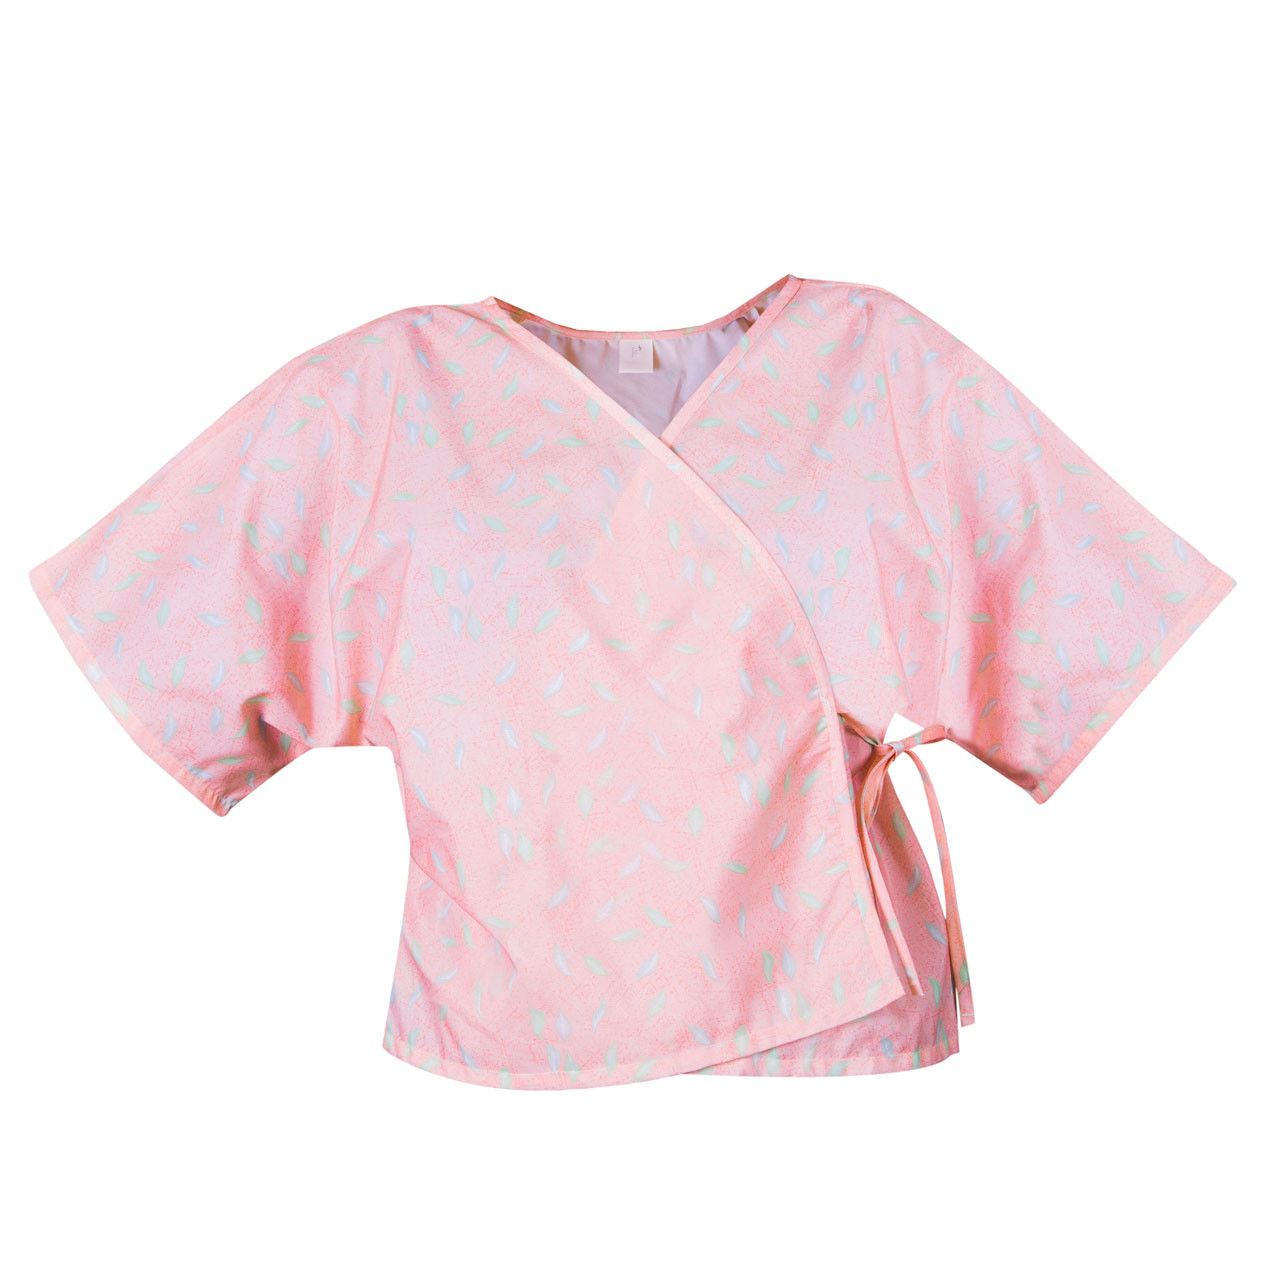 What range of sizes can the plus size mammography capes by American Dawn accommodate?